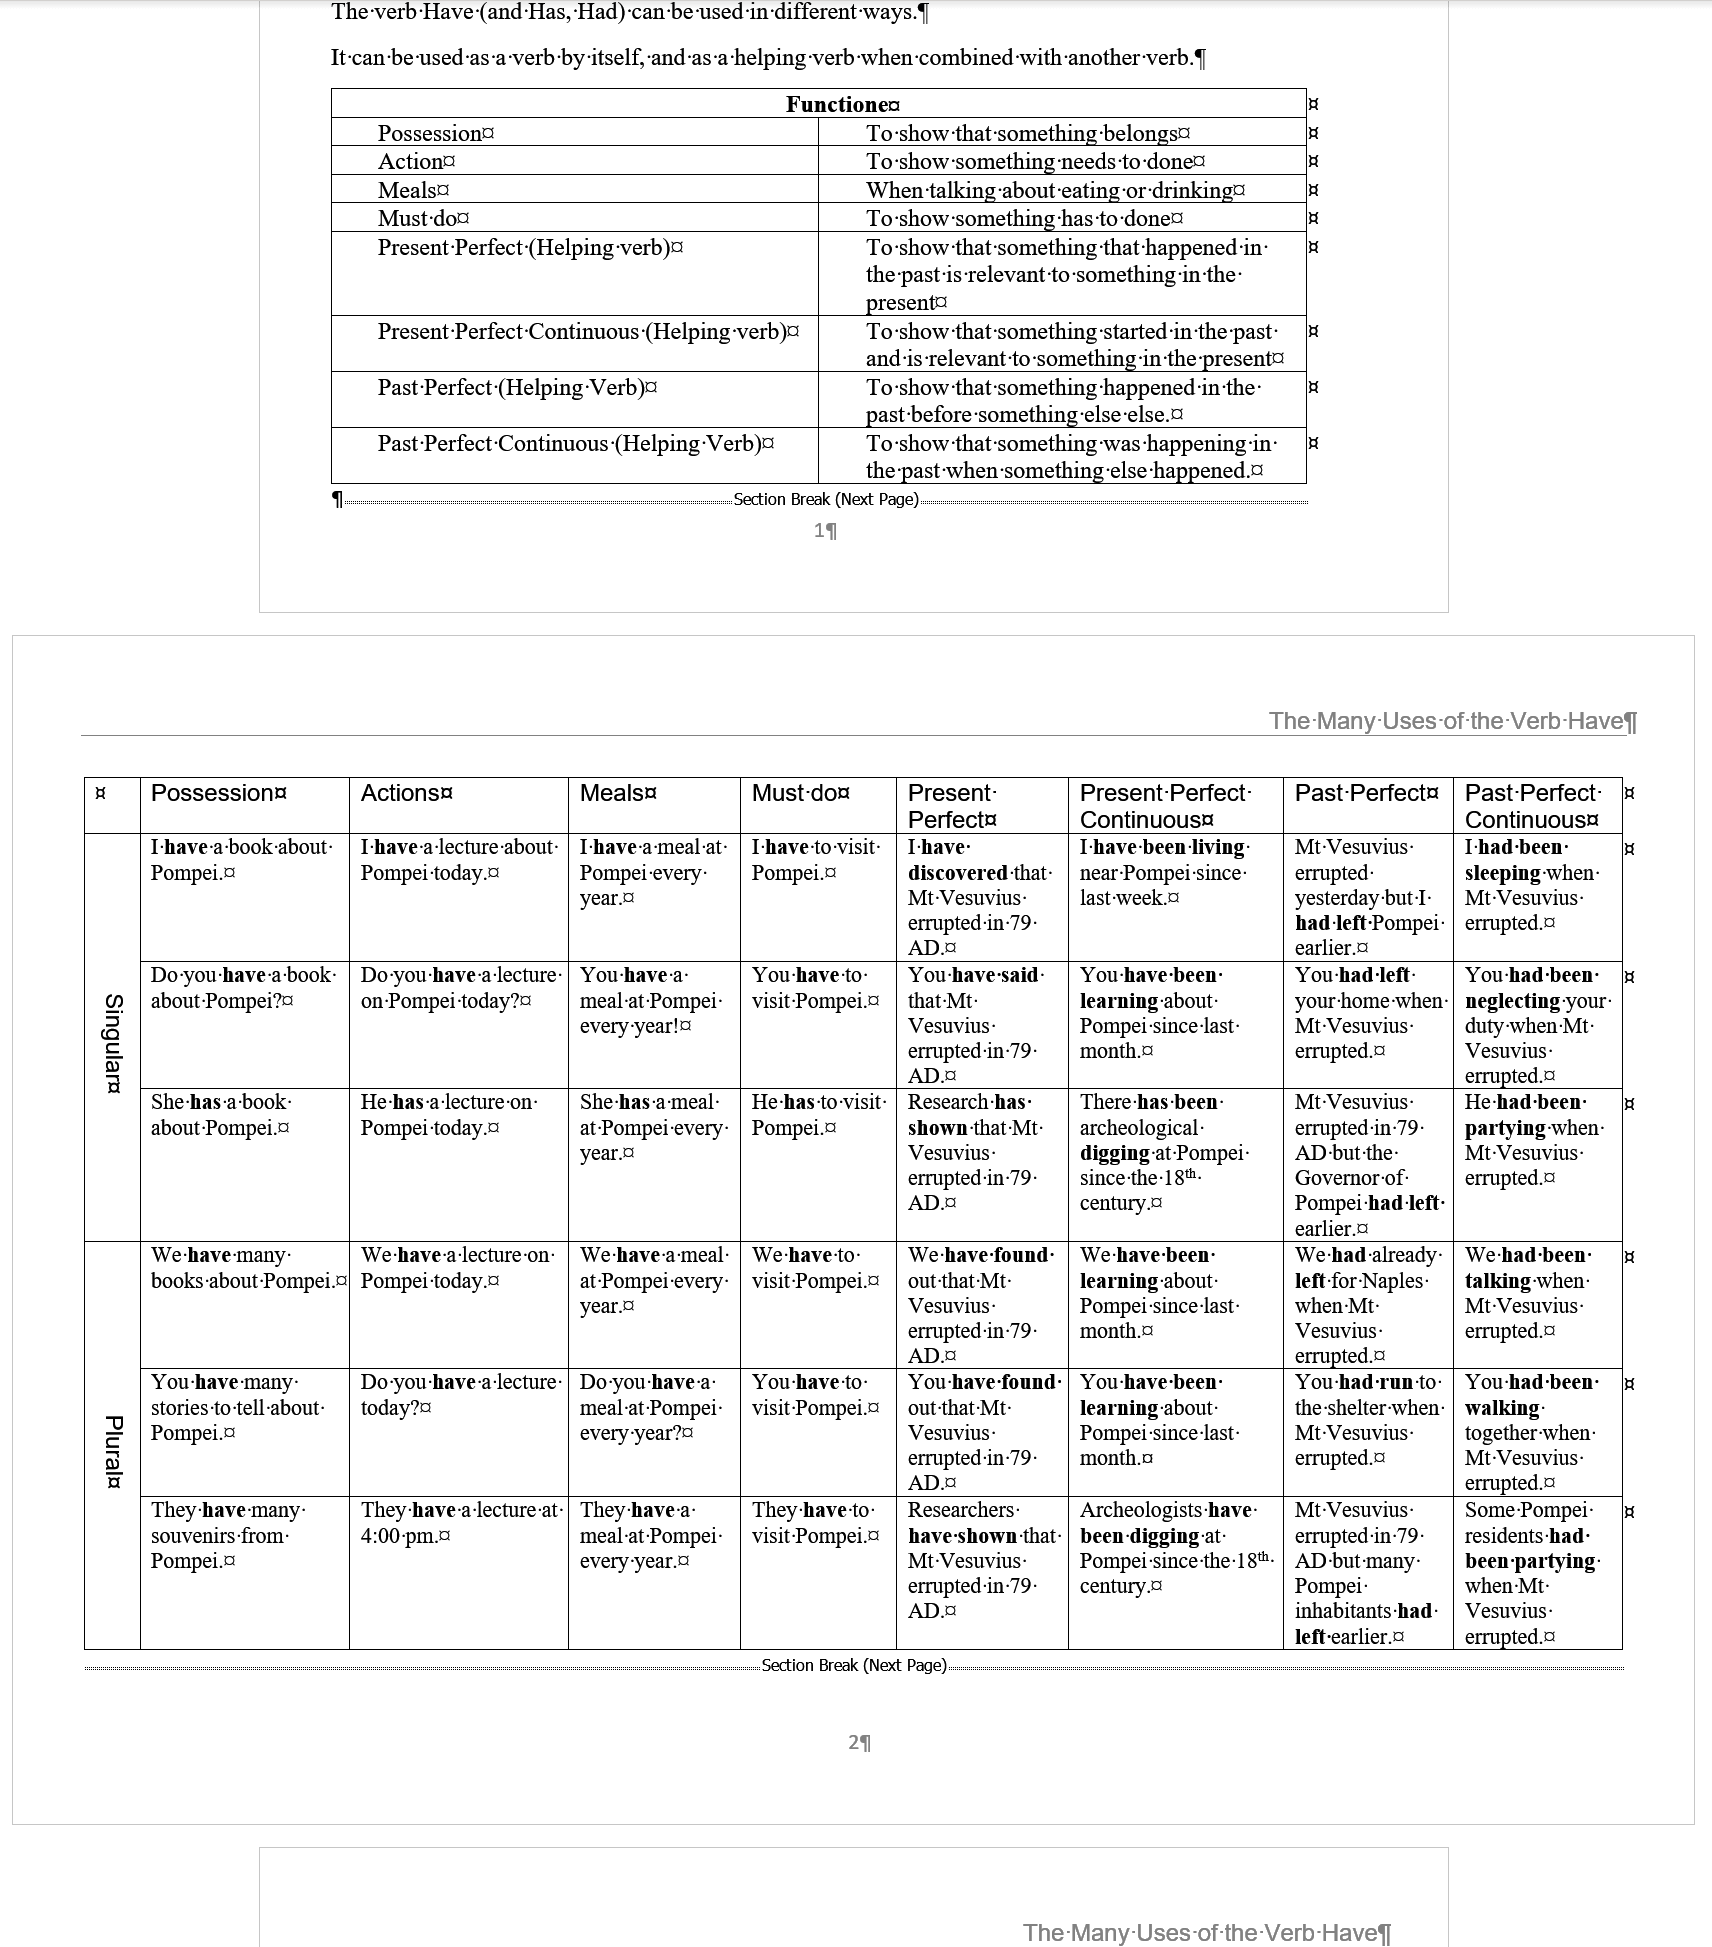 Example of a Landscape page within two Portrait pages in Word